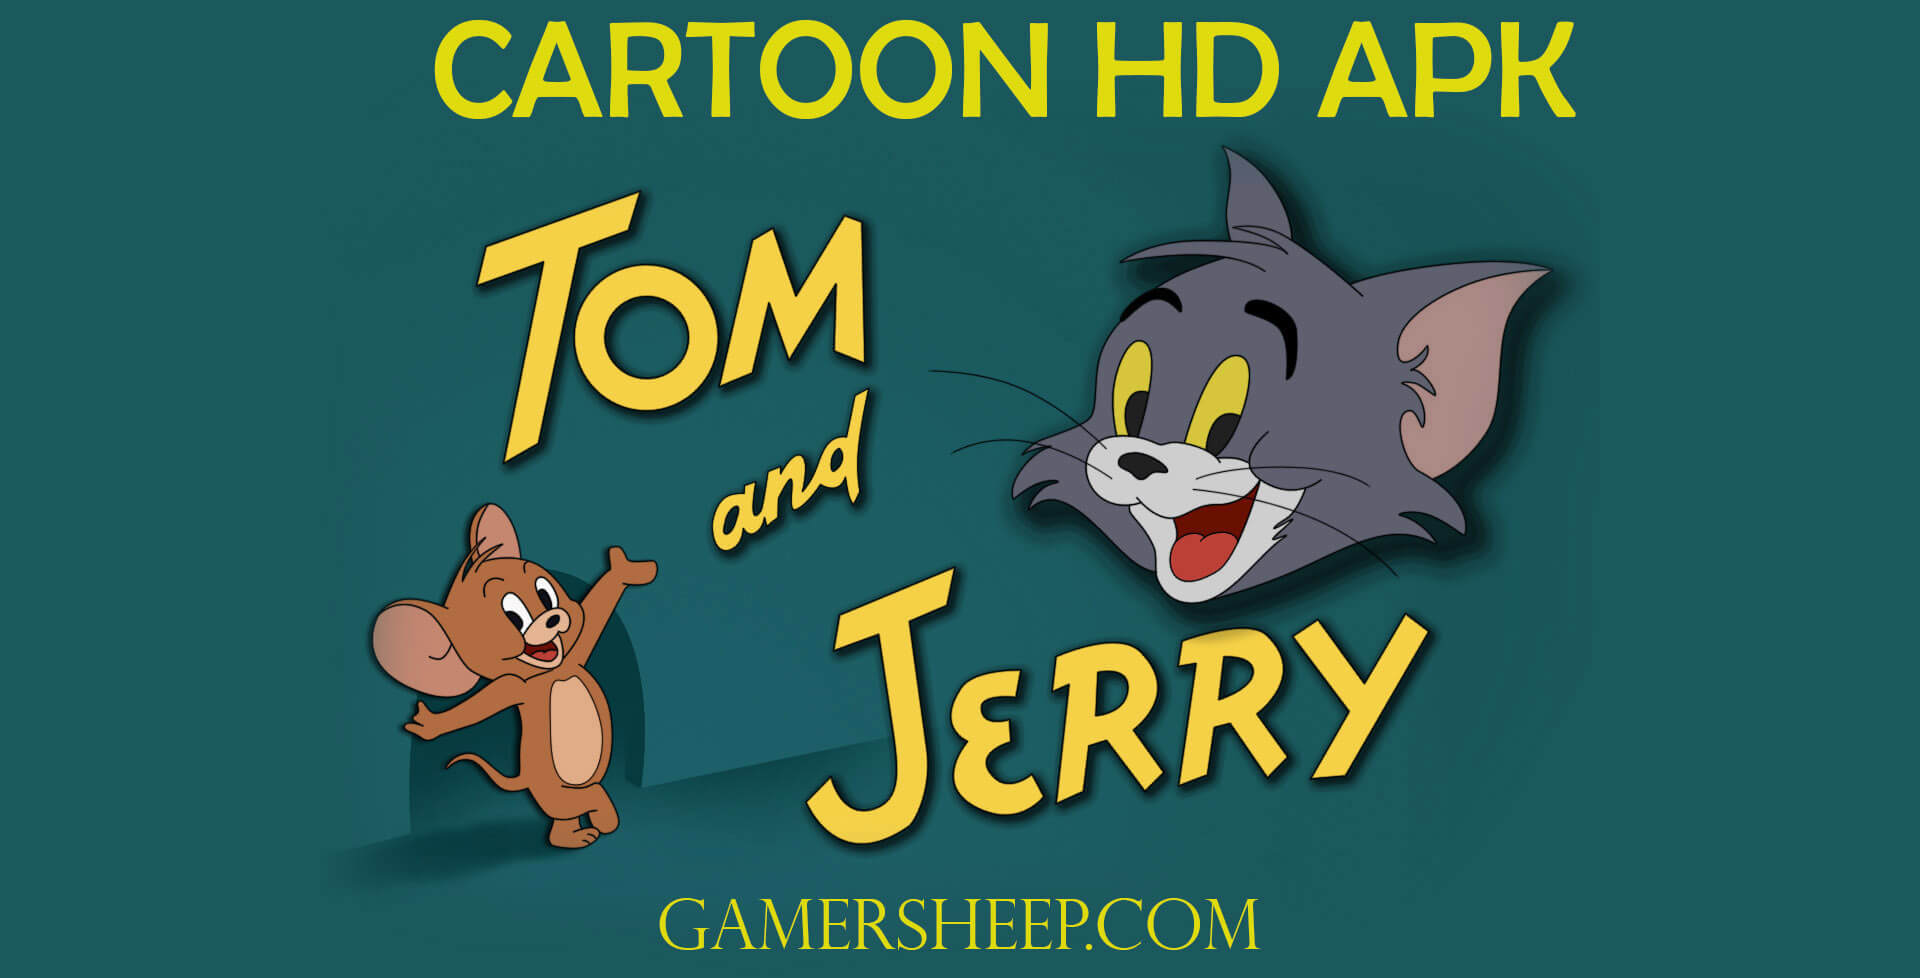 Cartoon Hd Apk Download For Android Latest Version 2019